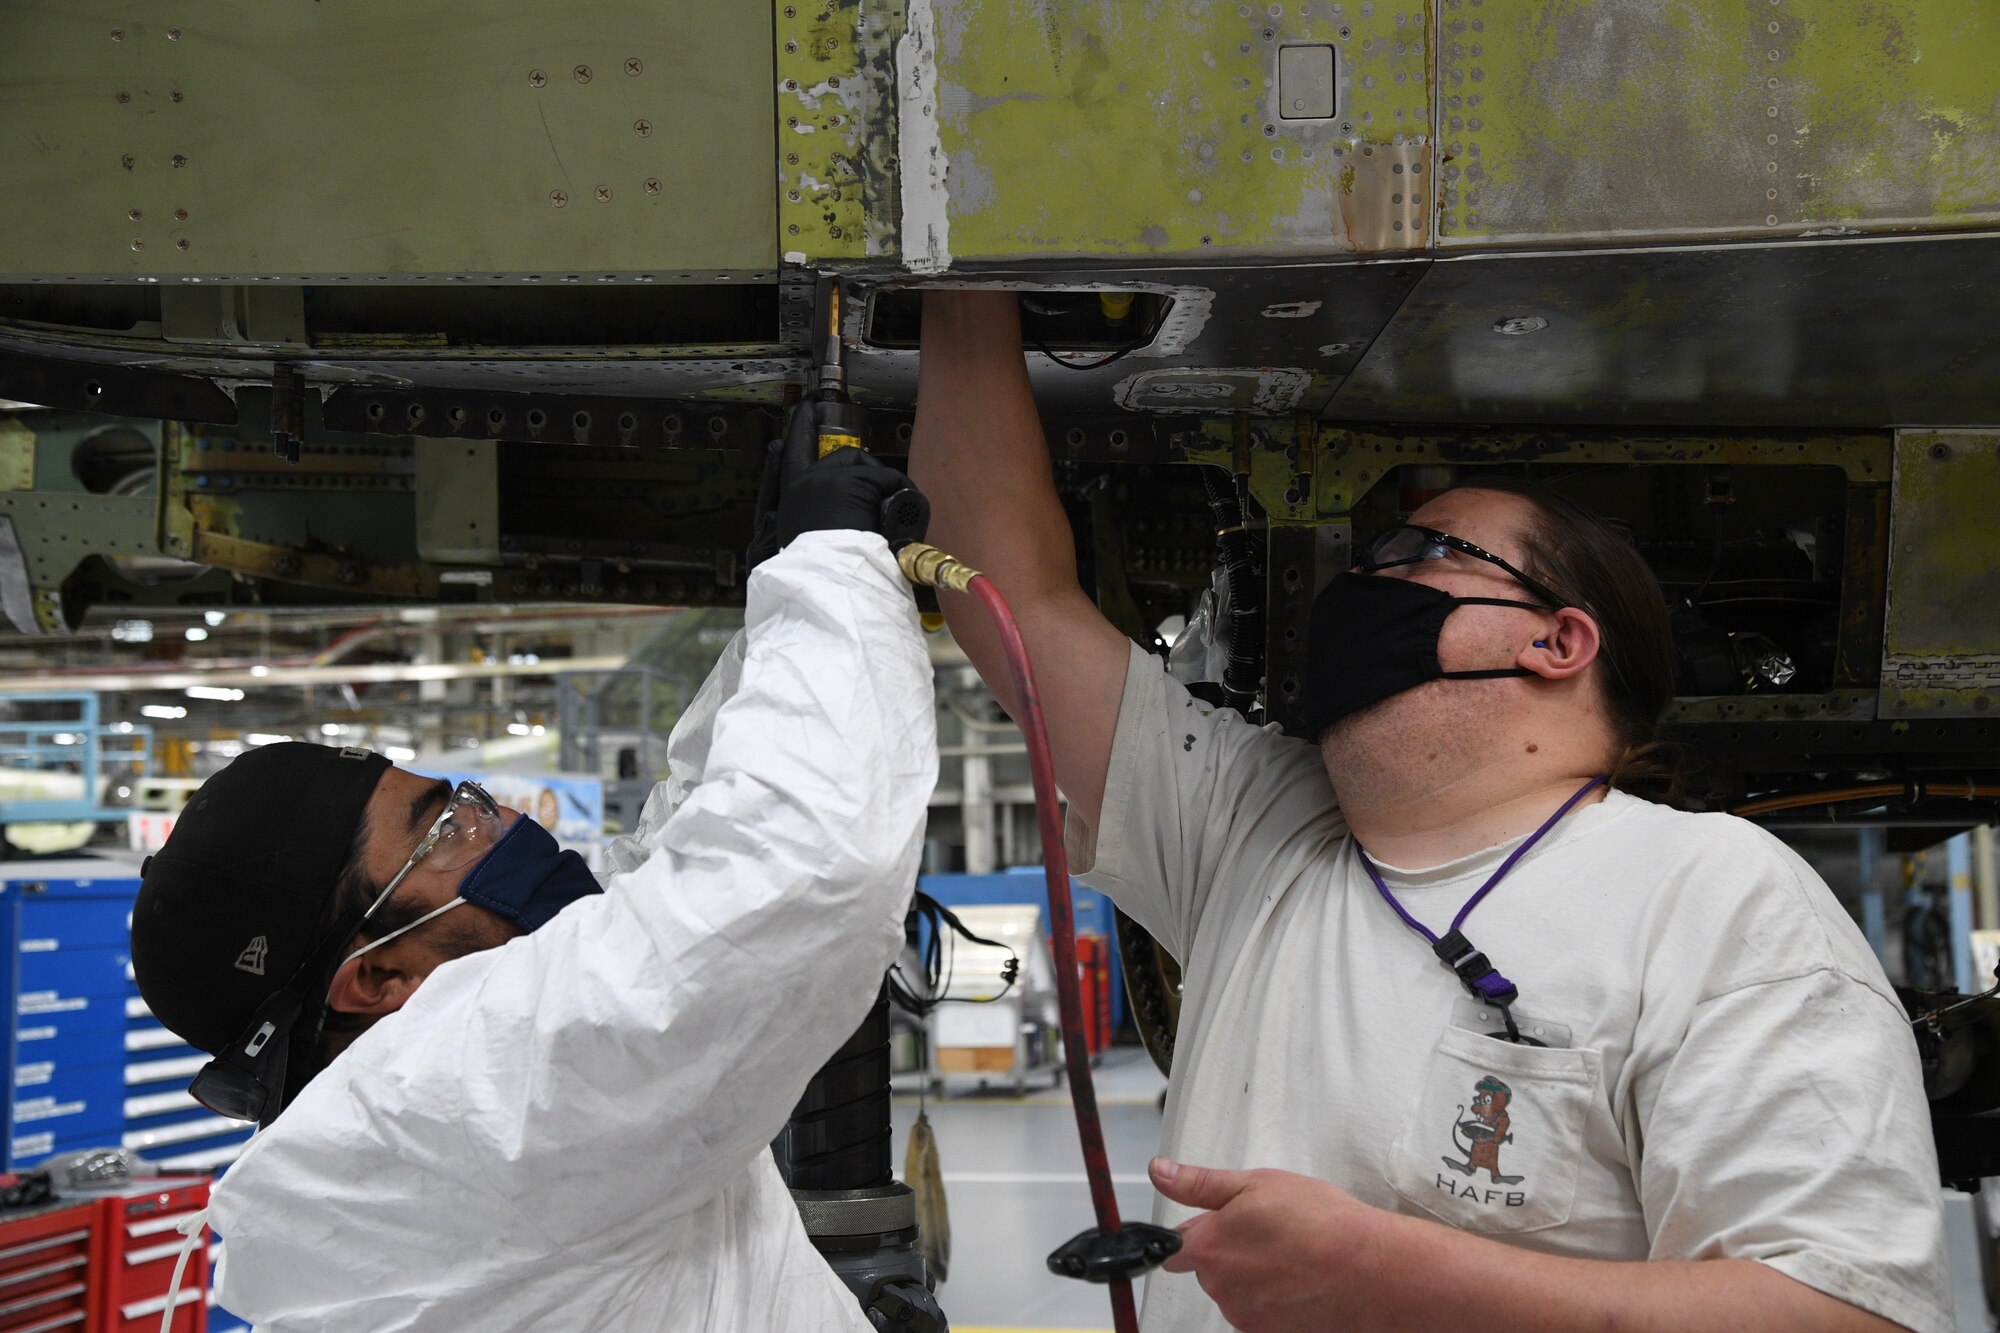 Juan Gutierrez, left, and Jeff Schmitt, 309th Aircraft Maintenance Group sheet metal mechanics, work on an F-16 at Hill Air Force Base, Utah, May, 8, 2020. Comprised of seven maintenance squadrons and more than 2,000 personnel, the 309th AMXG performs depot maintenance, repair and overhaul on A-10, C-130, F-16, F-22, F-35 and T-38 airframes. (U.S. Air Force photo by R. Nial Bradshaw)